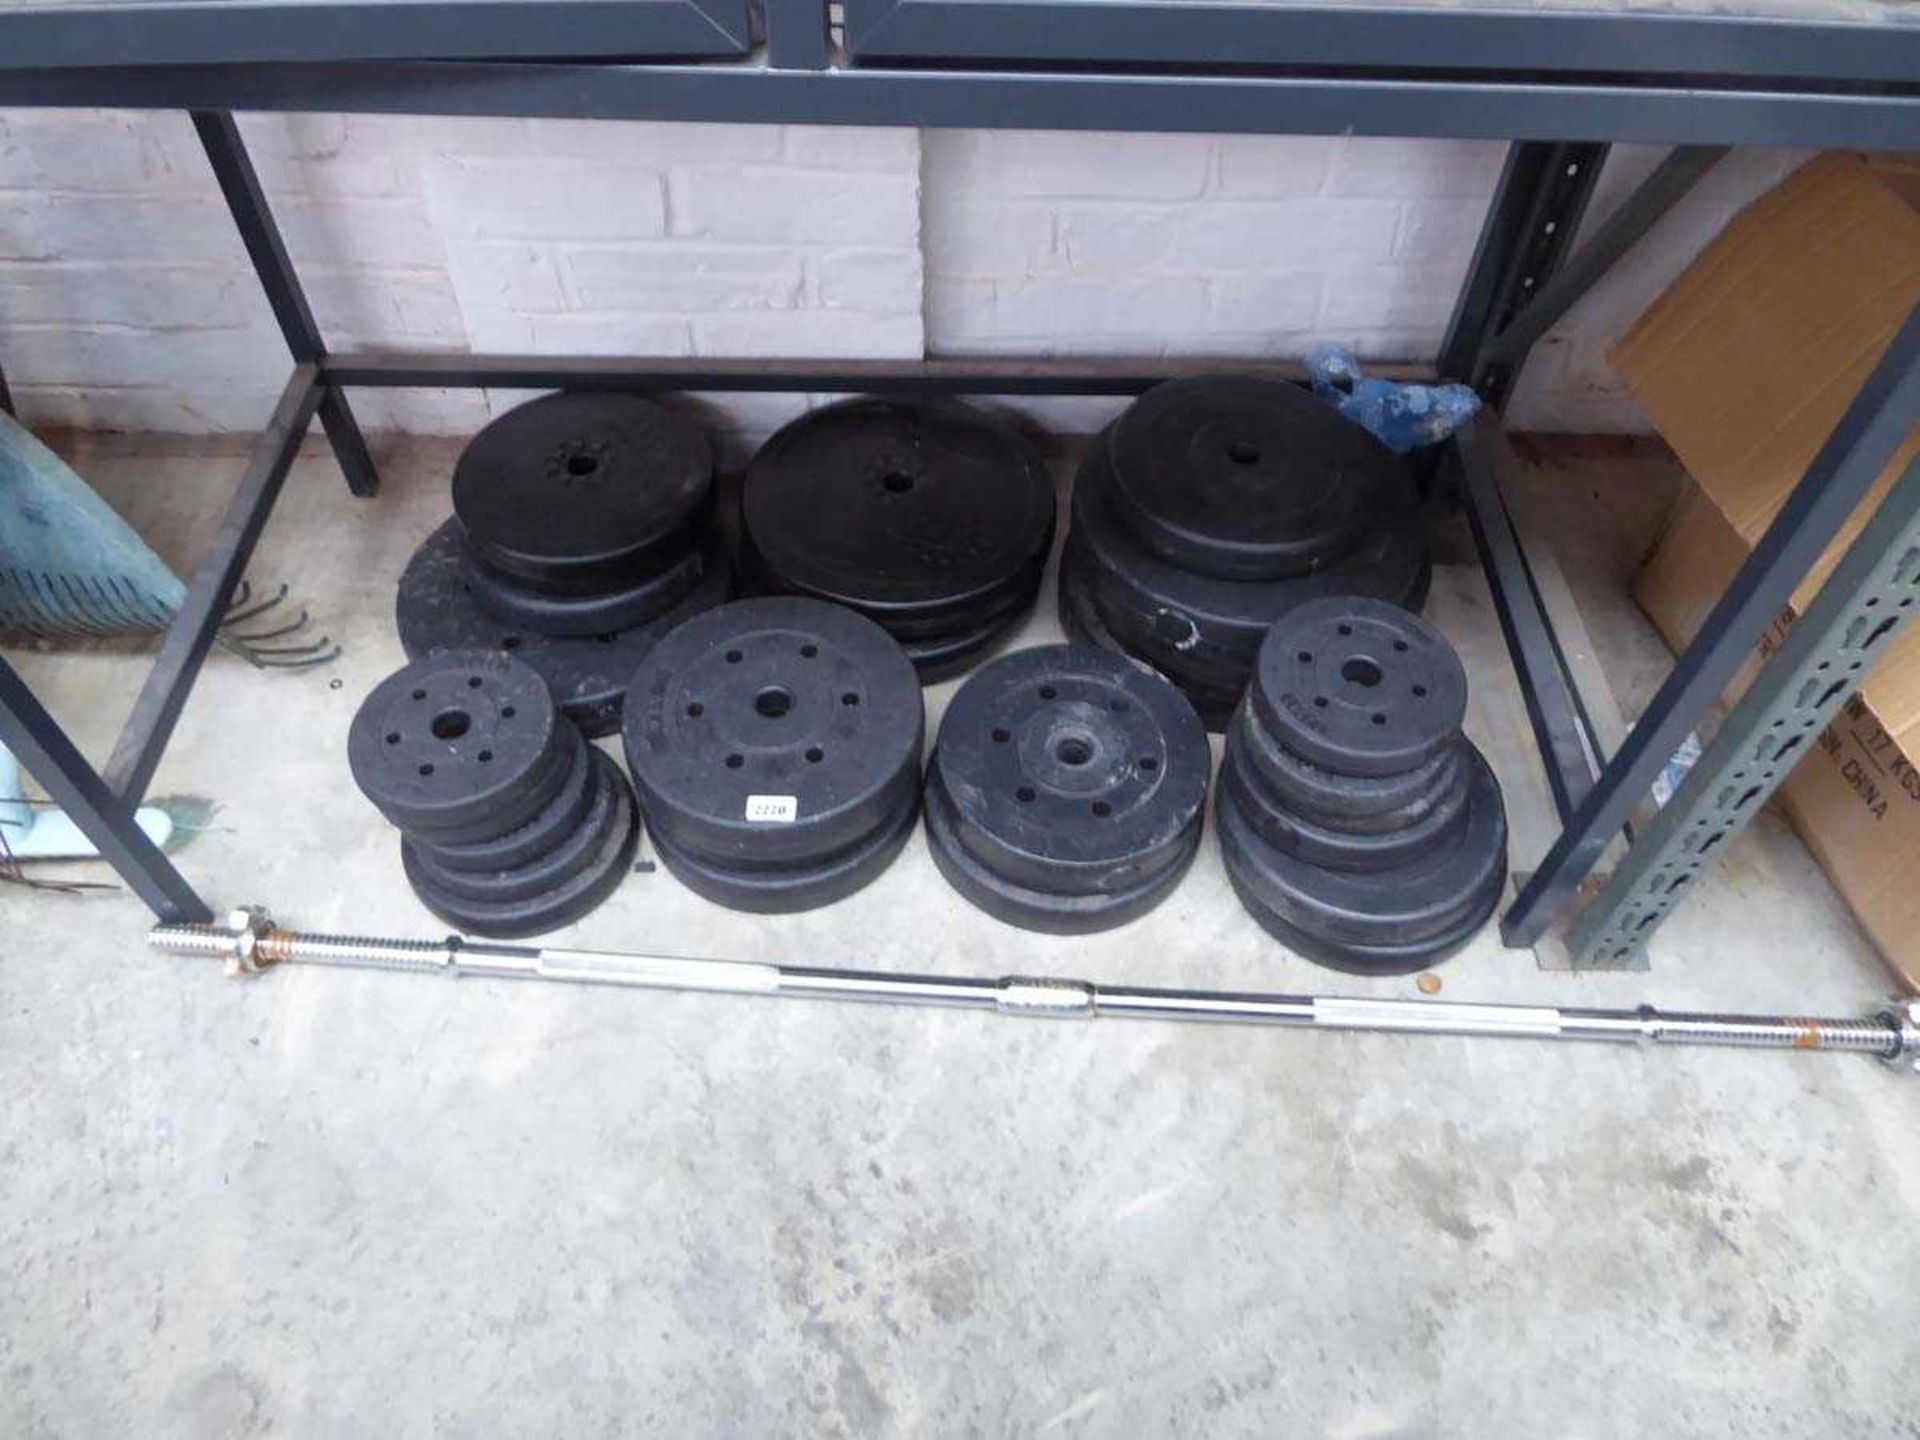 Large quantity of mixed size weights with weight lifting bar